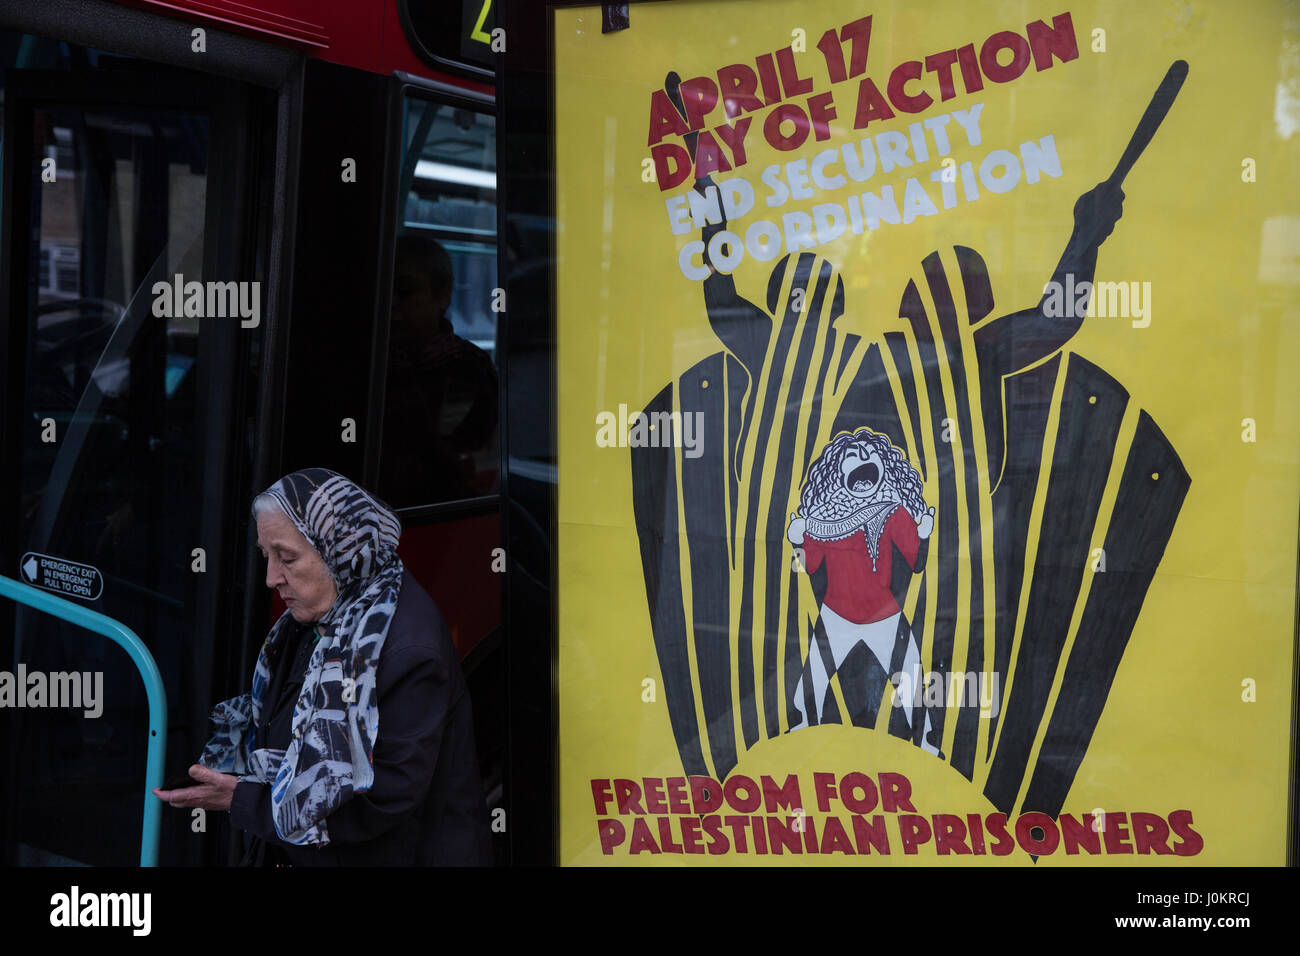 London, UK. 13th April, 2017. A protest stencil in West London for a day of action to coincide with Palestinian Prisoners' Day on 17th April. It calls Stock Photo